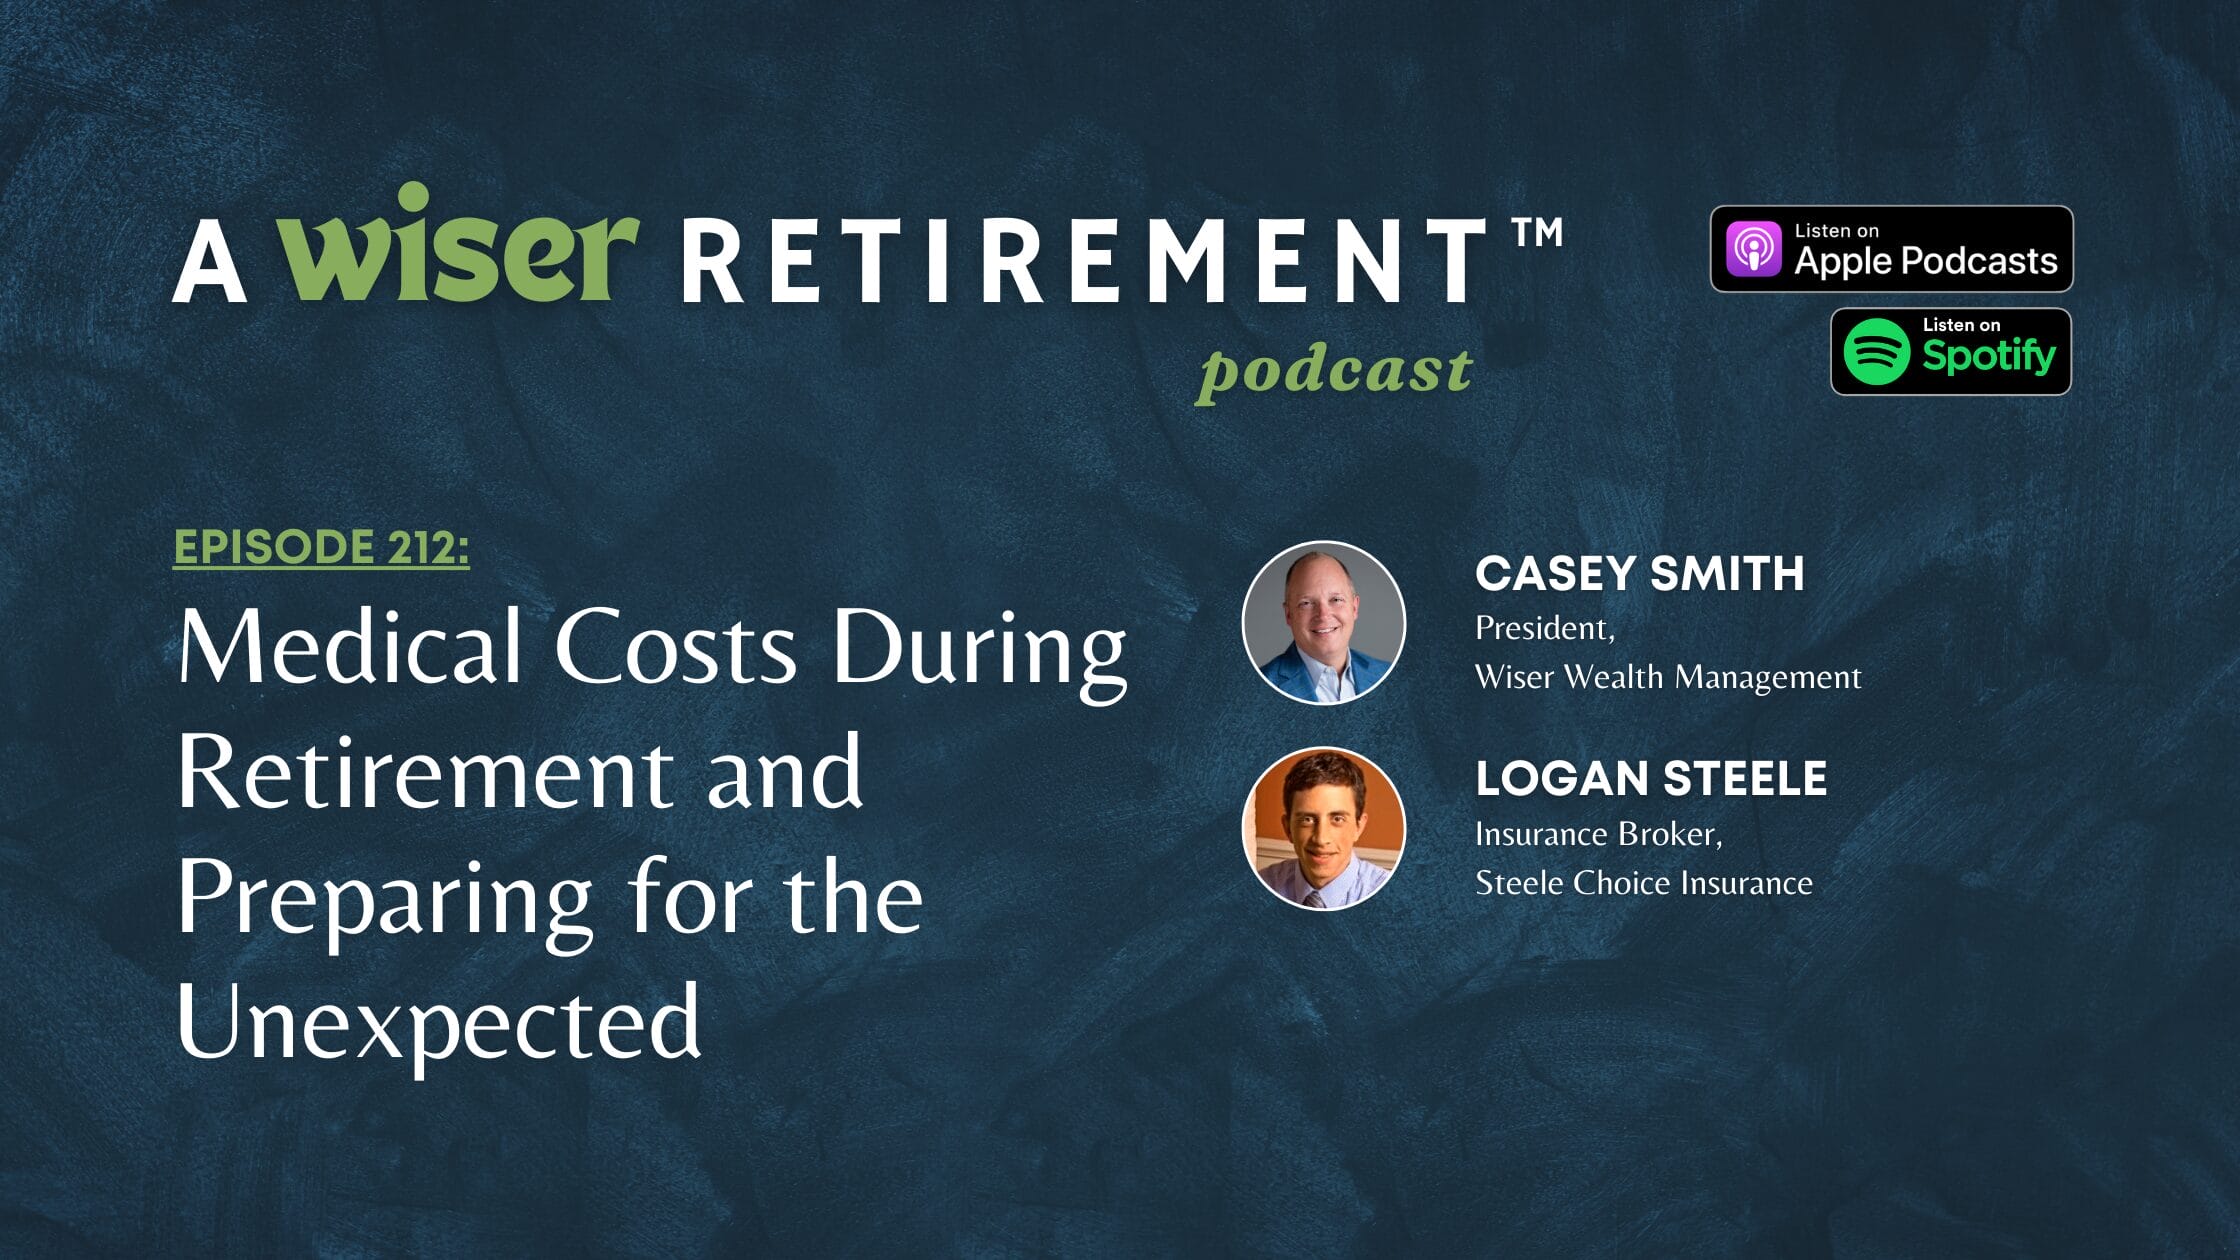 Medical Costs During Retirement and Preparing for the Unexpected